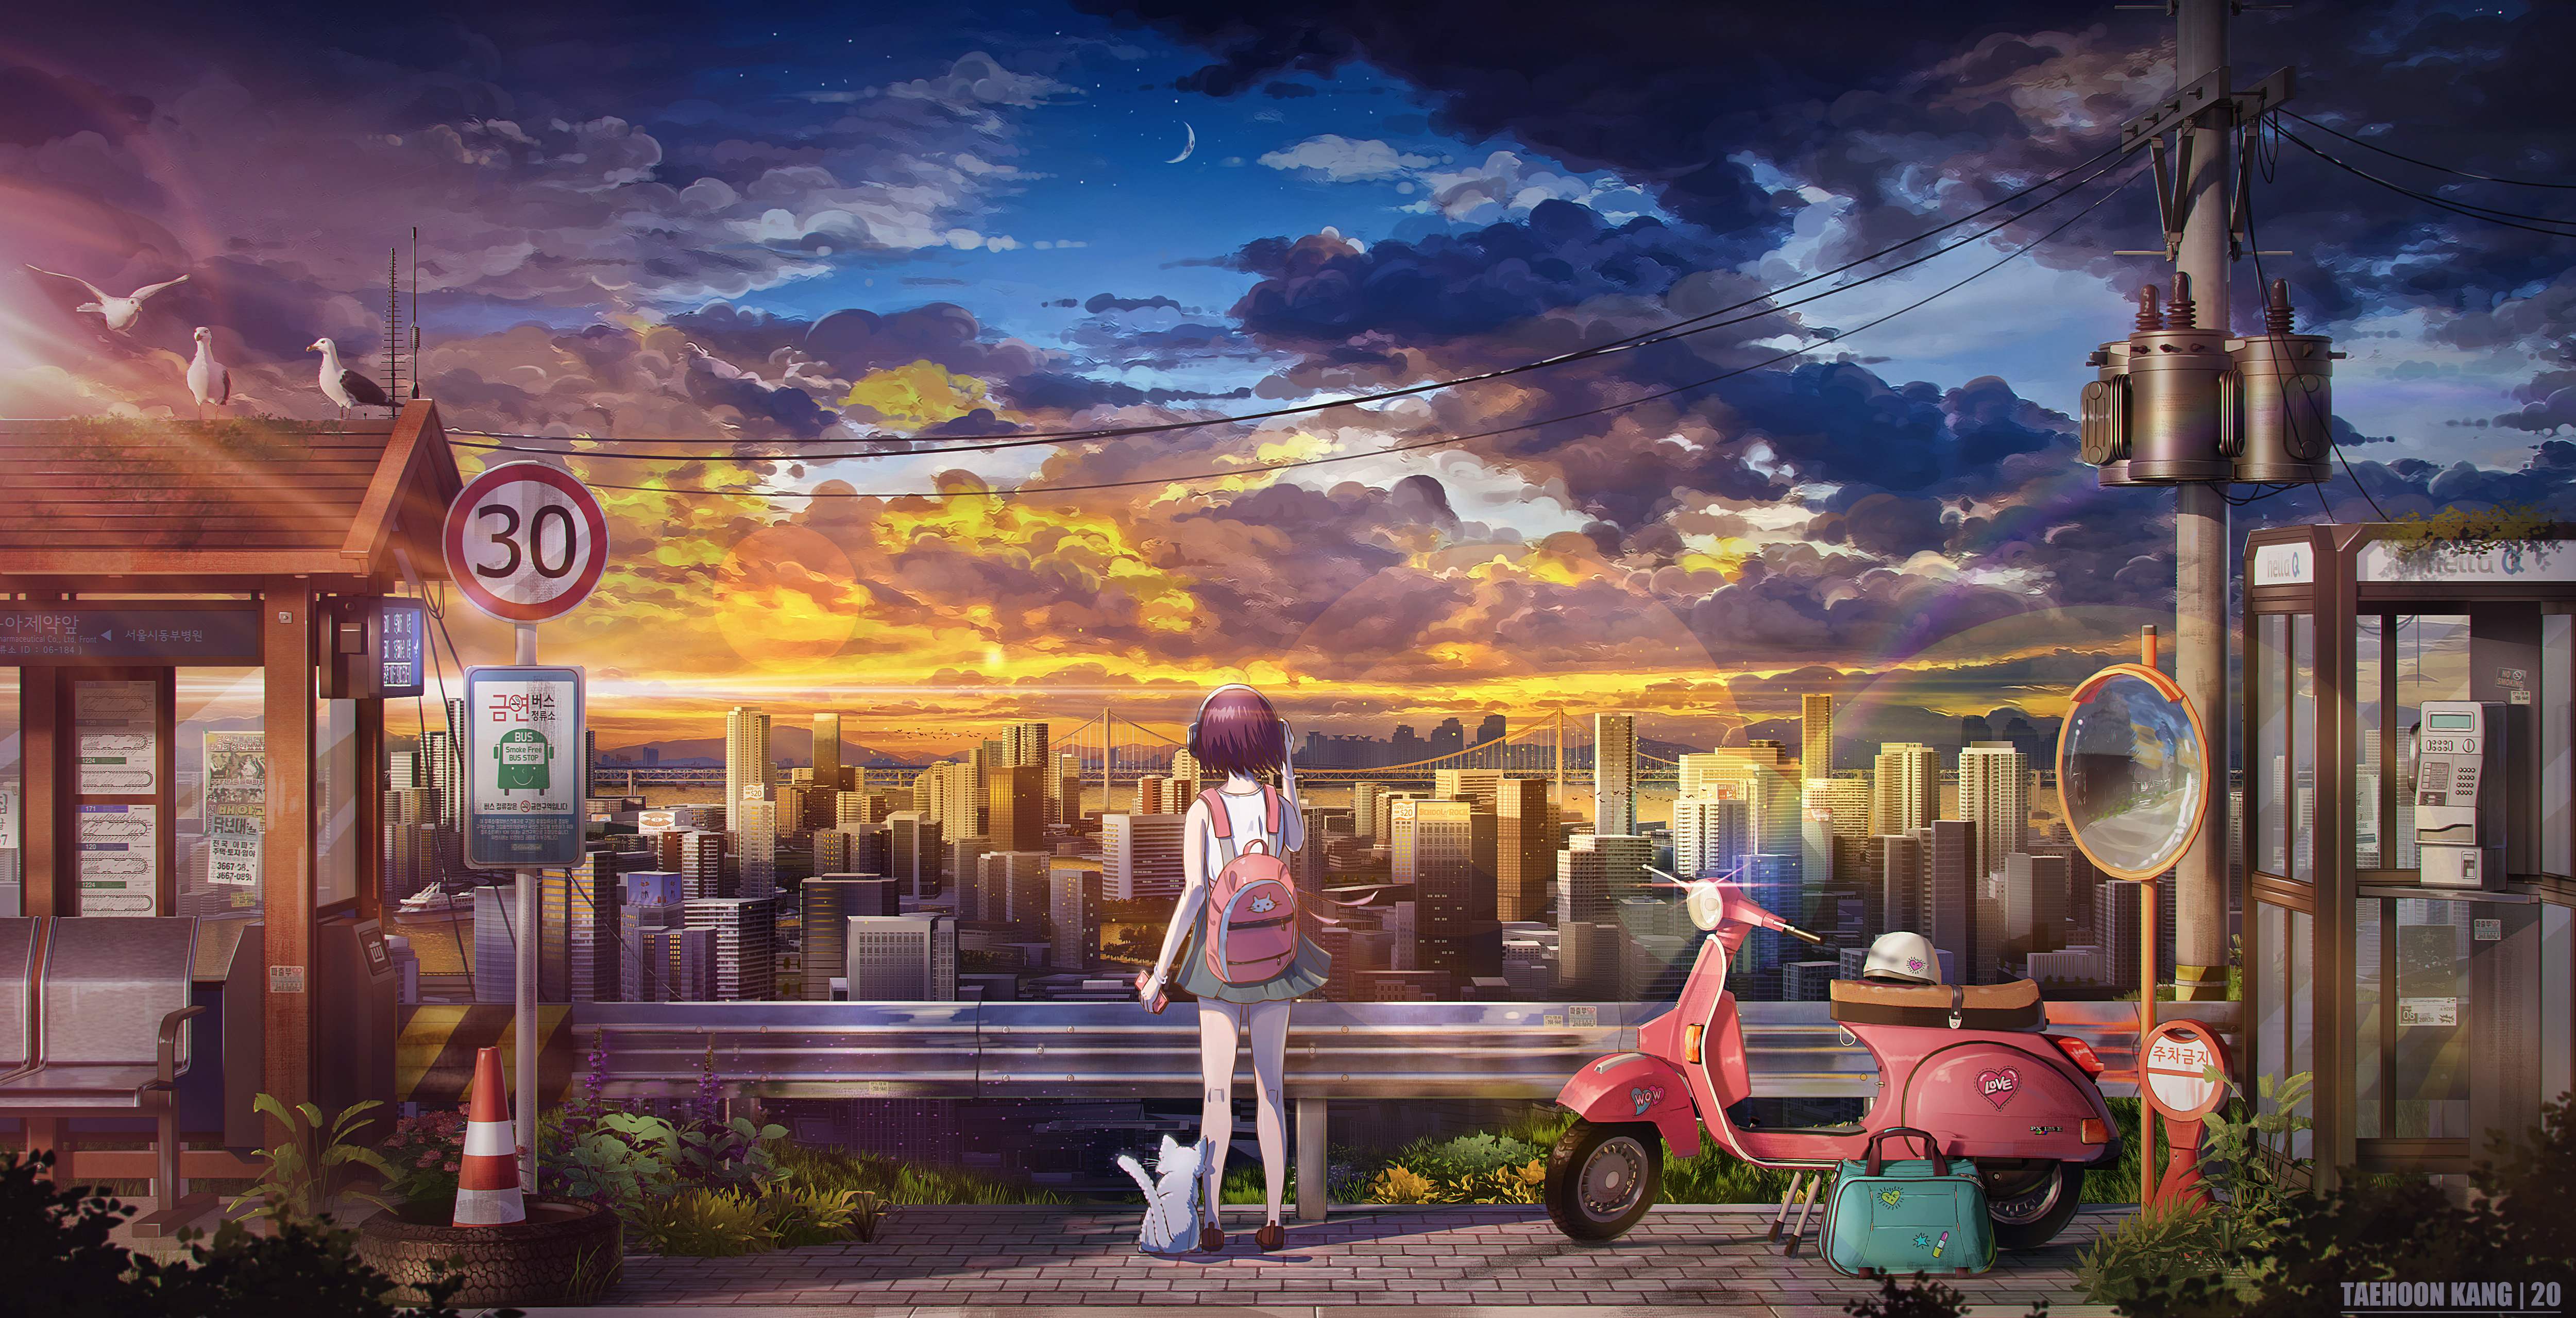 Anime 5000x2559 anime girls scooters schoolgirl school uniform Uomi watermarked birds road sign city cityscape artwork sunset sunset glow cats clouds animals